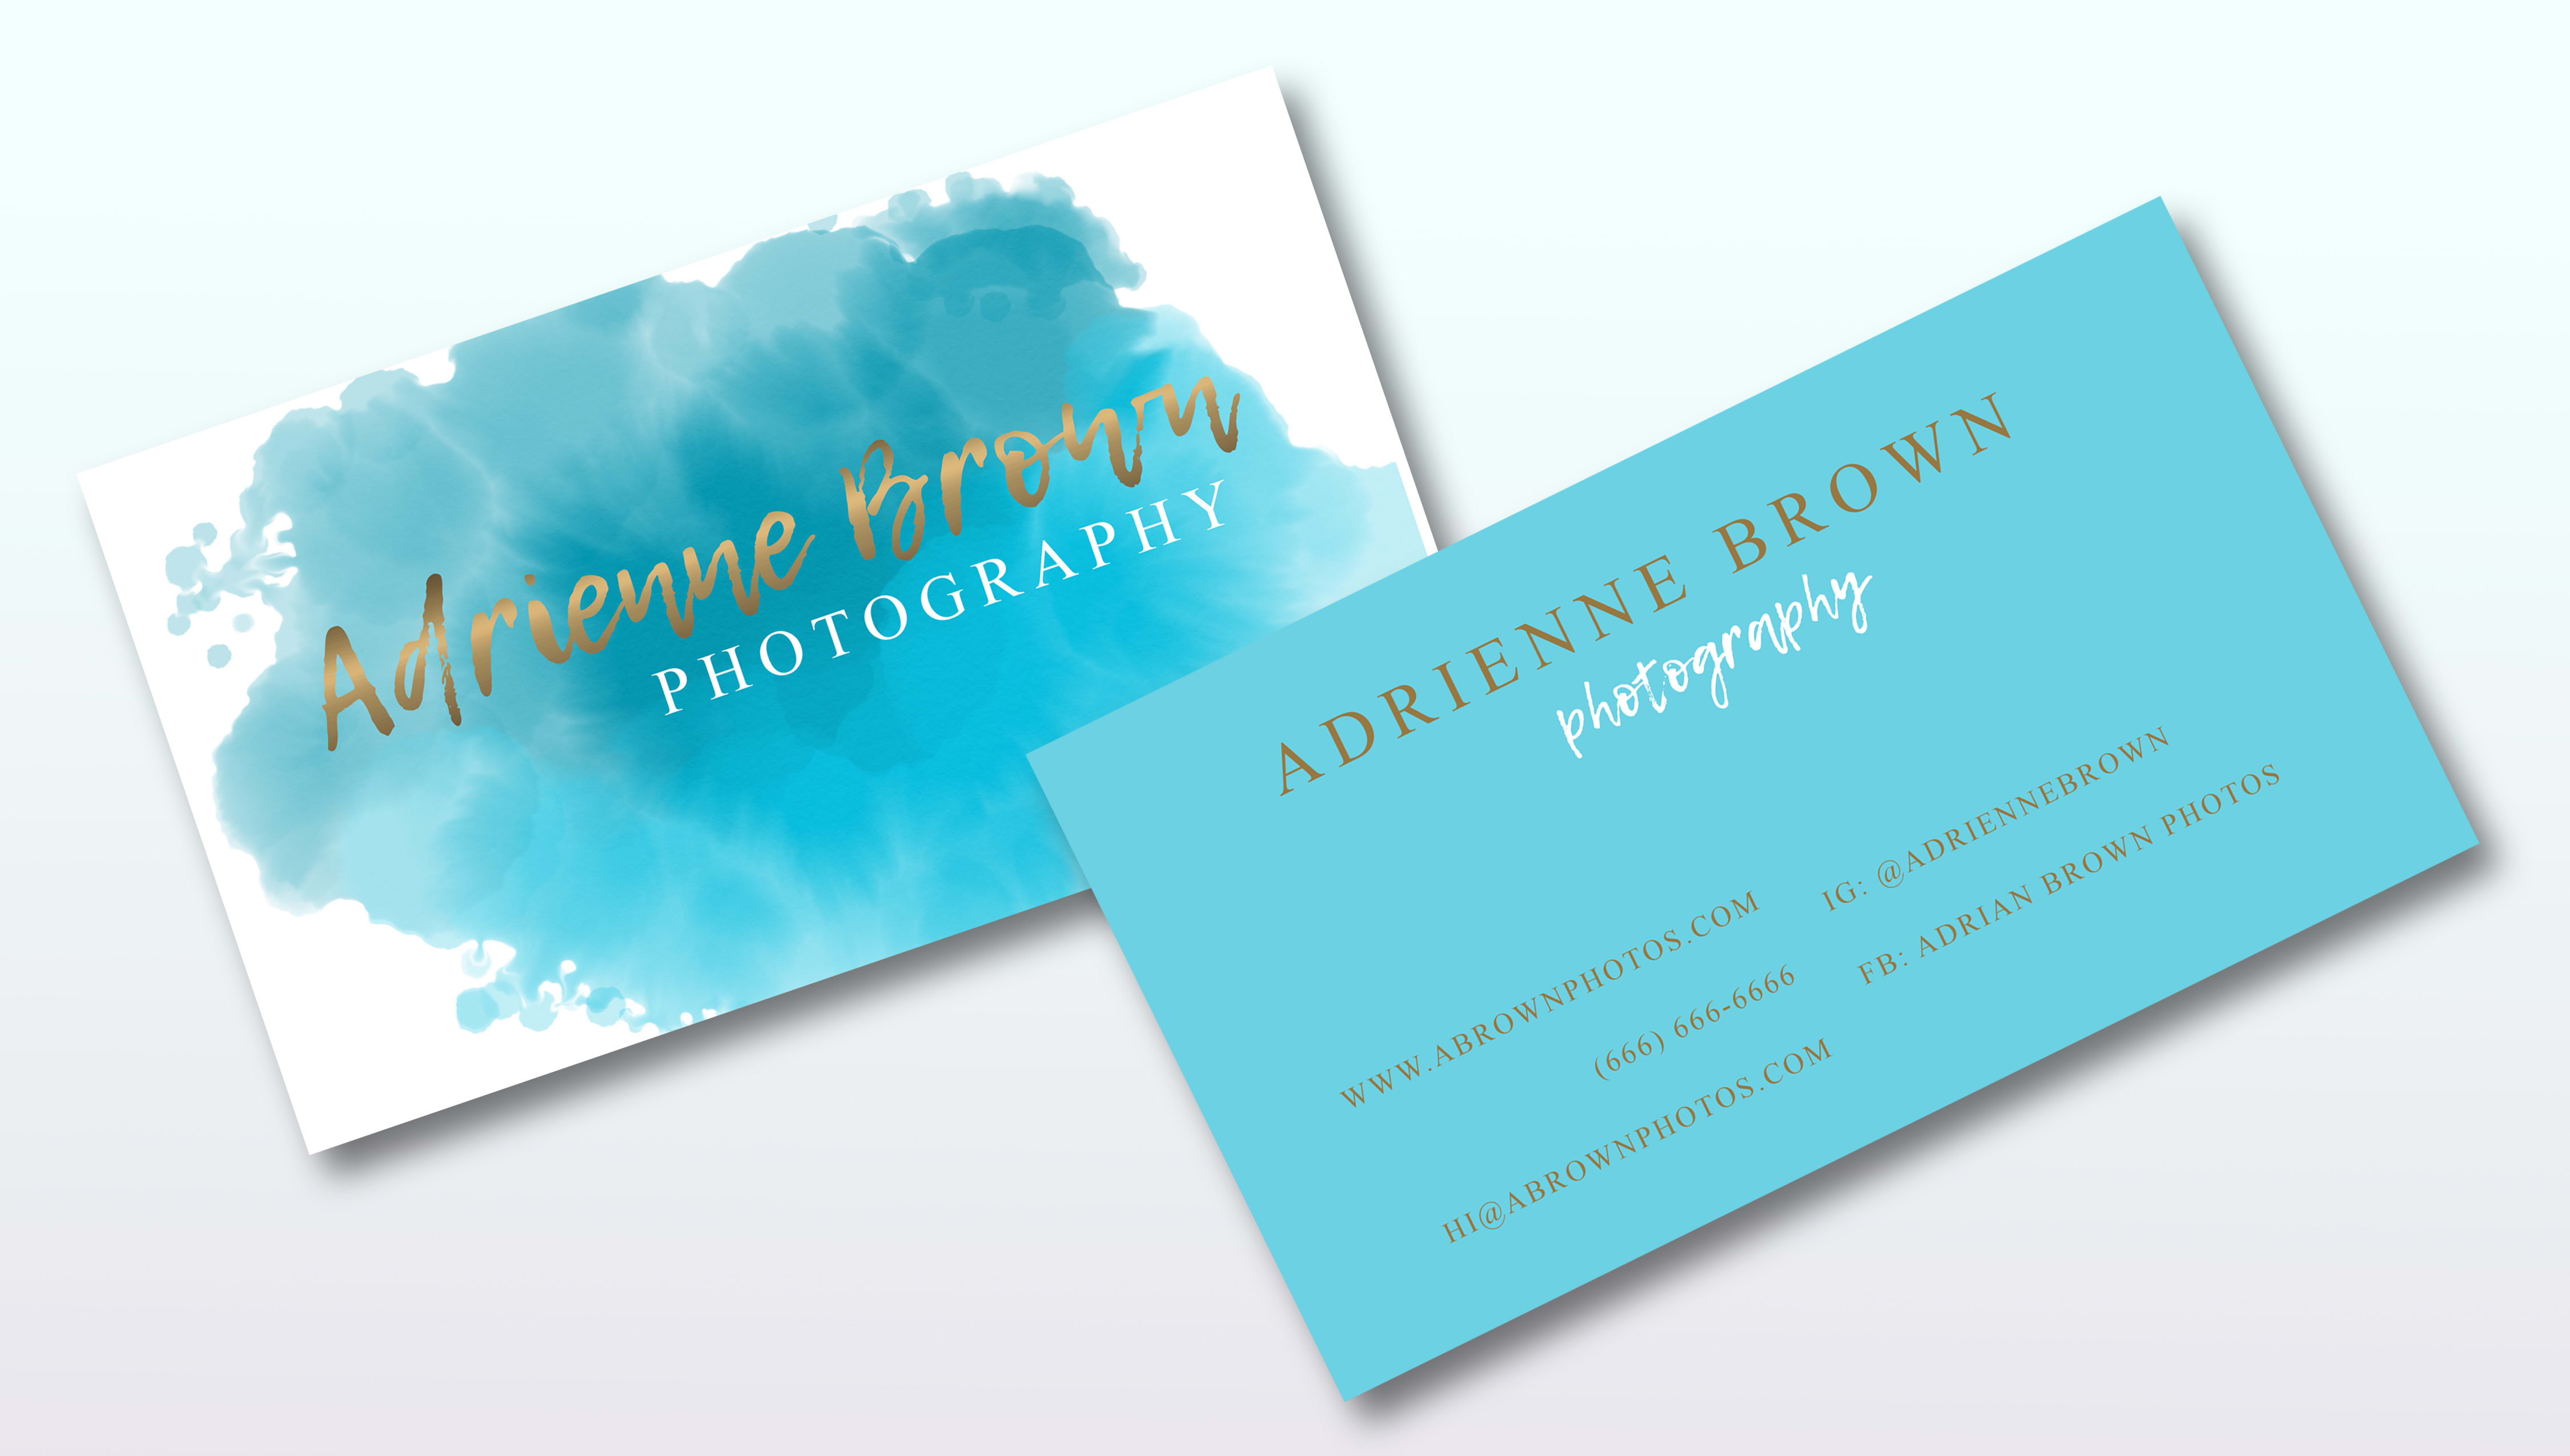 Watercolor Business Cards / Watercolor Business Card Emerald Gold Printable Business Card Design Gold Glitter Business Card Green Paint Business Card Design Stylist In 2021 Watercolor Business Cards Glitter Business Cards Painted Business Cards - Pink gold watercolor floral bring a book enclosure square business card.